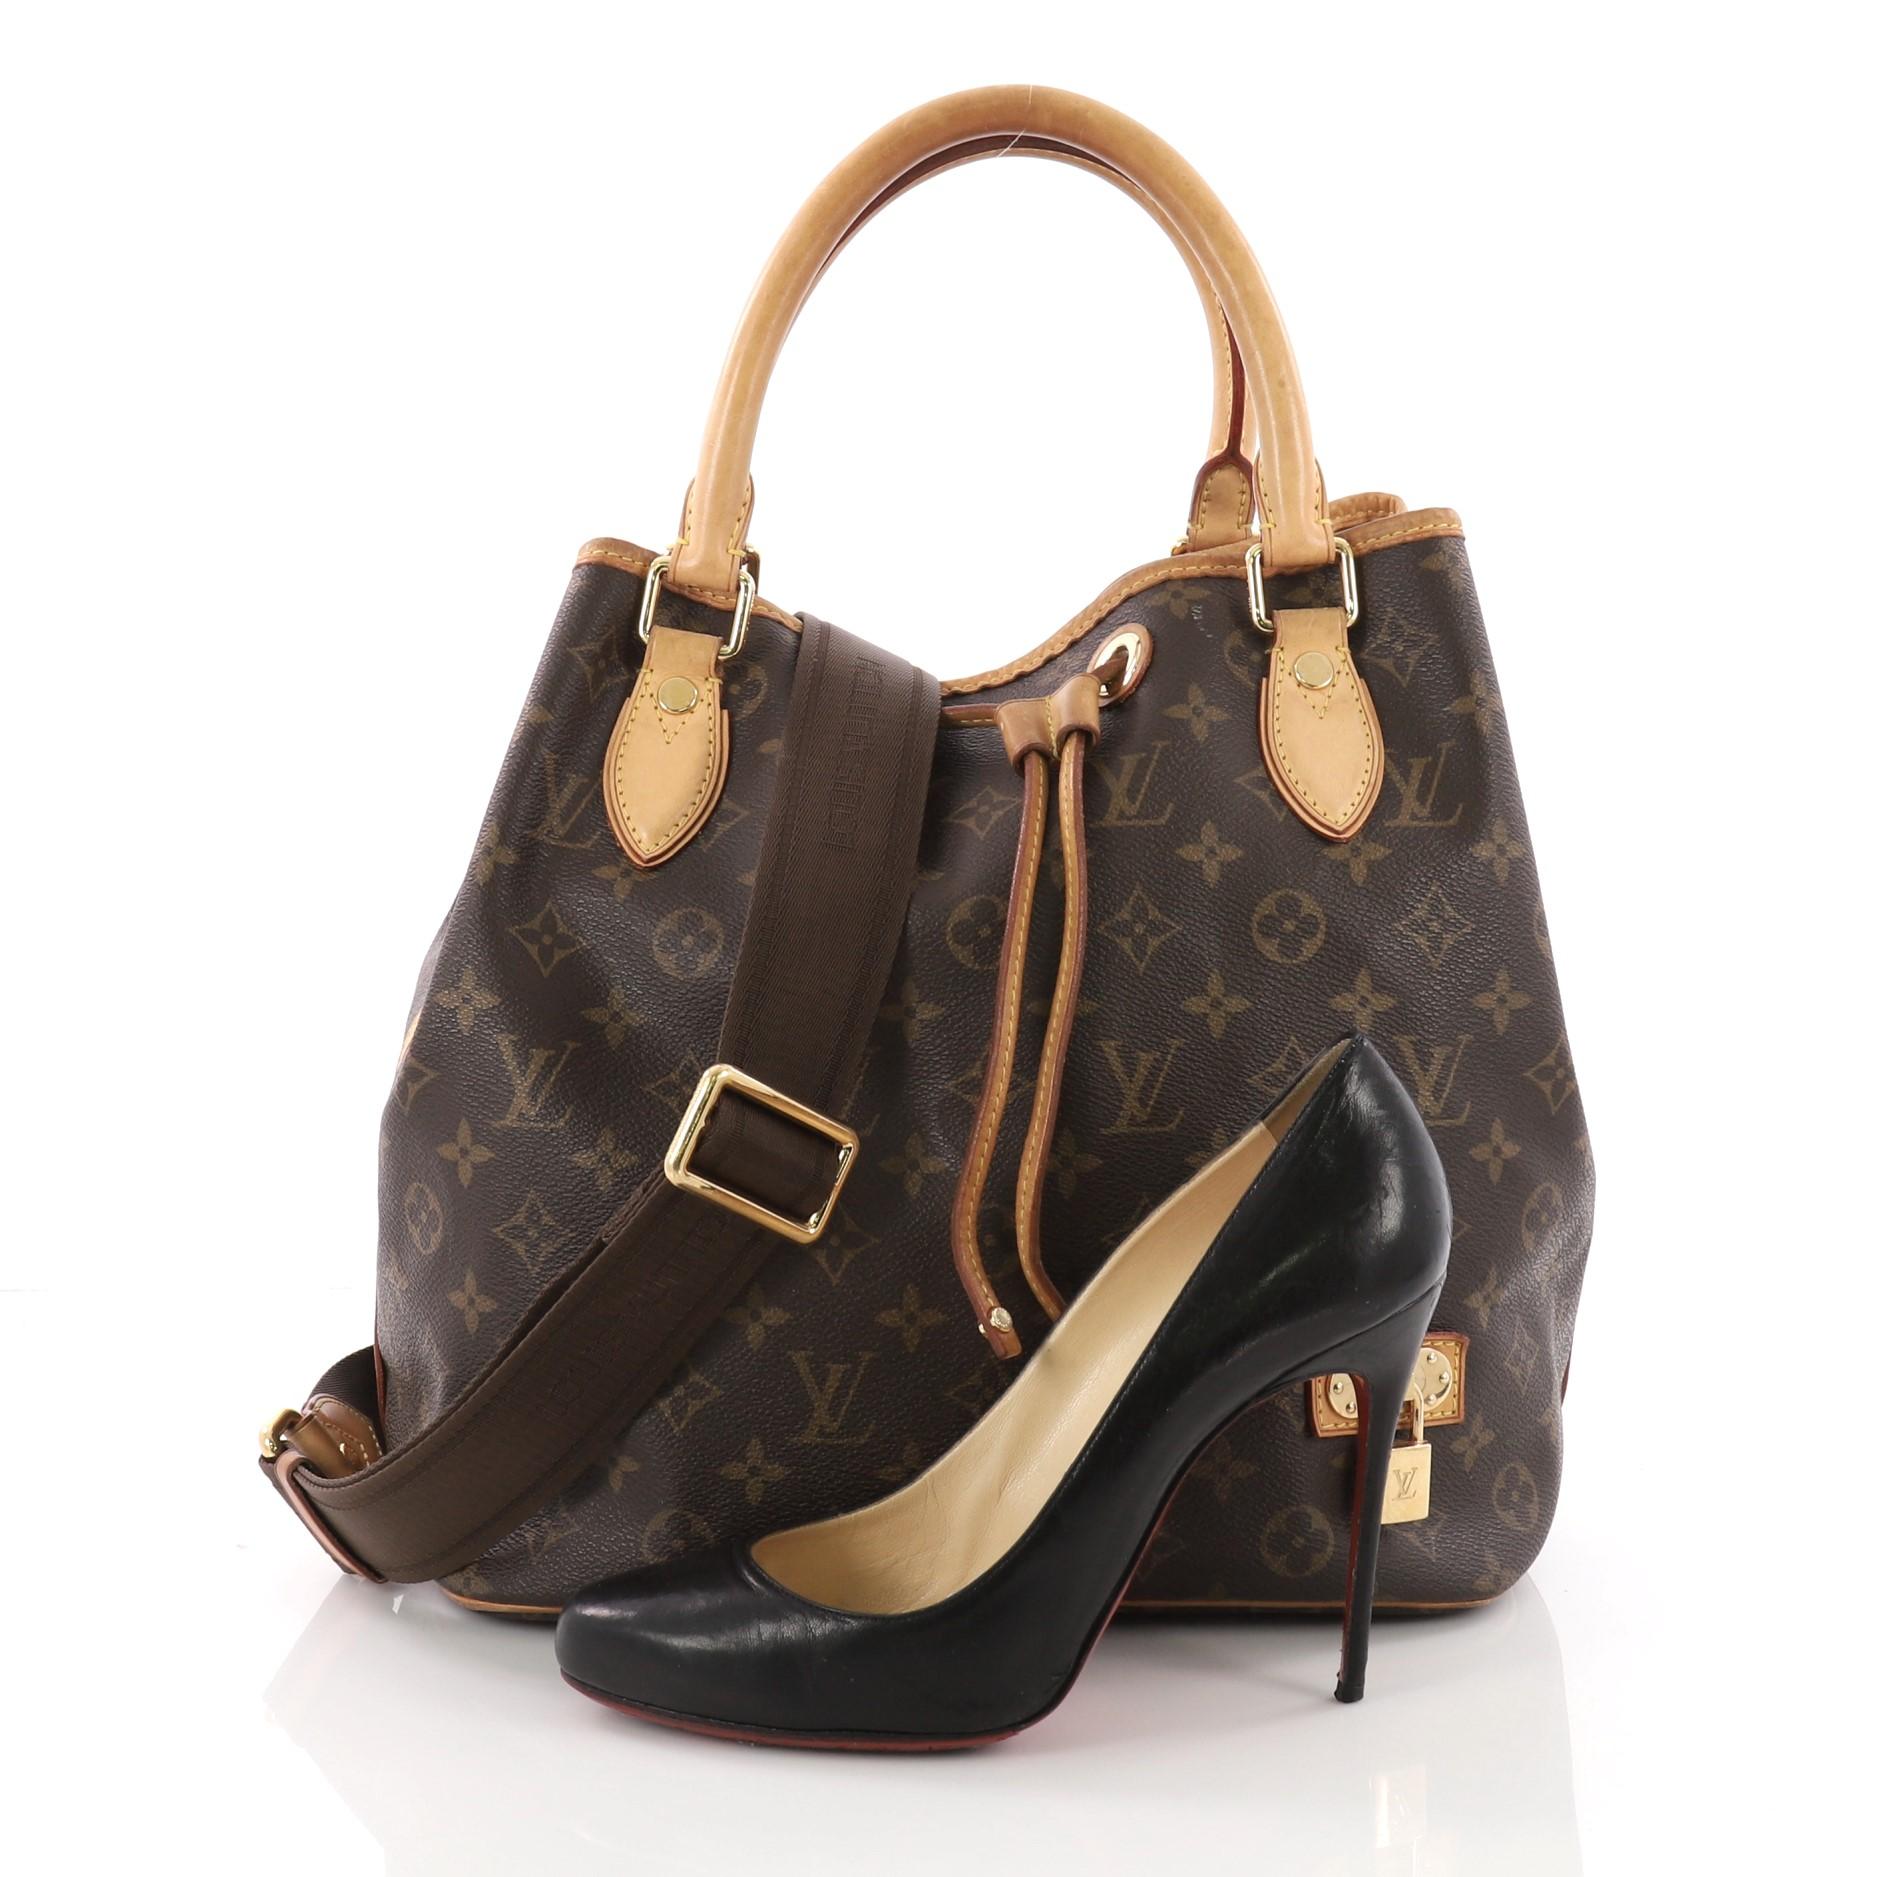 This authentic Louis Vuitton Neo Shoulder Bag Monogram Canvas is perfect for an everyday casual look. Crafted in brown monogram coated canvas, this bag features singe loop leather handle, decorative lock, vachetta handles and trims, protective base